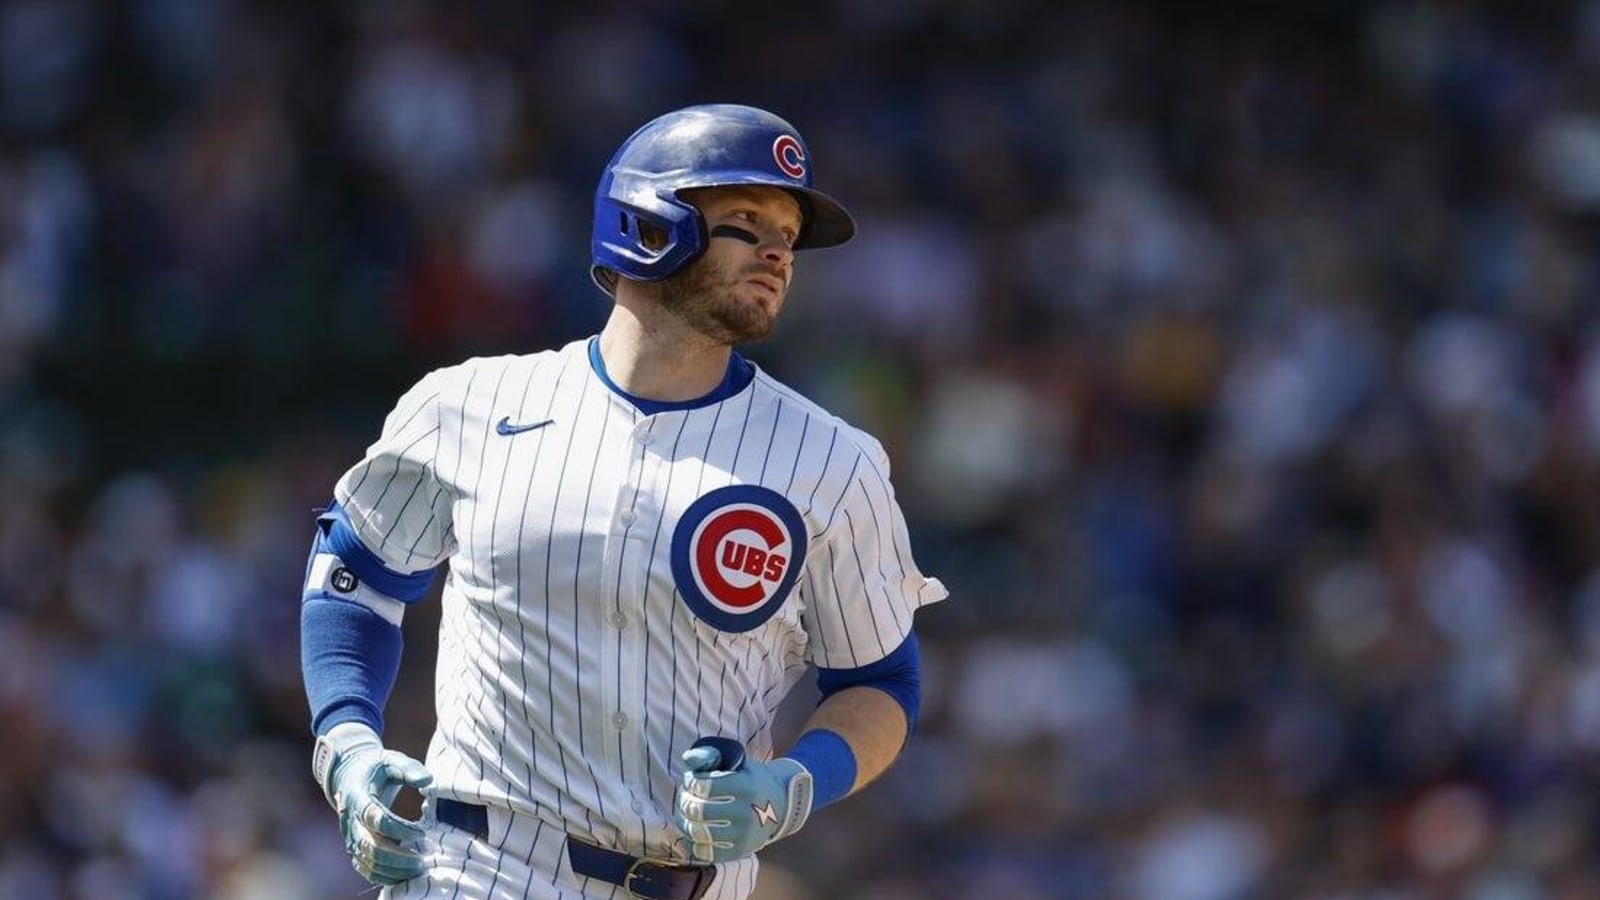 Cubs hoping to shake hitting funk in Pittsburgh